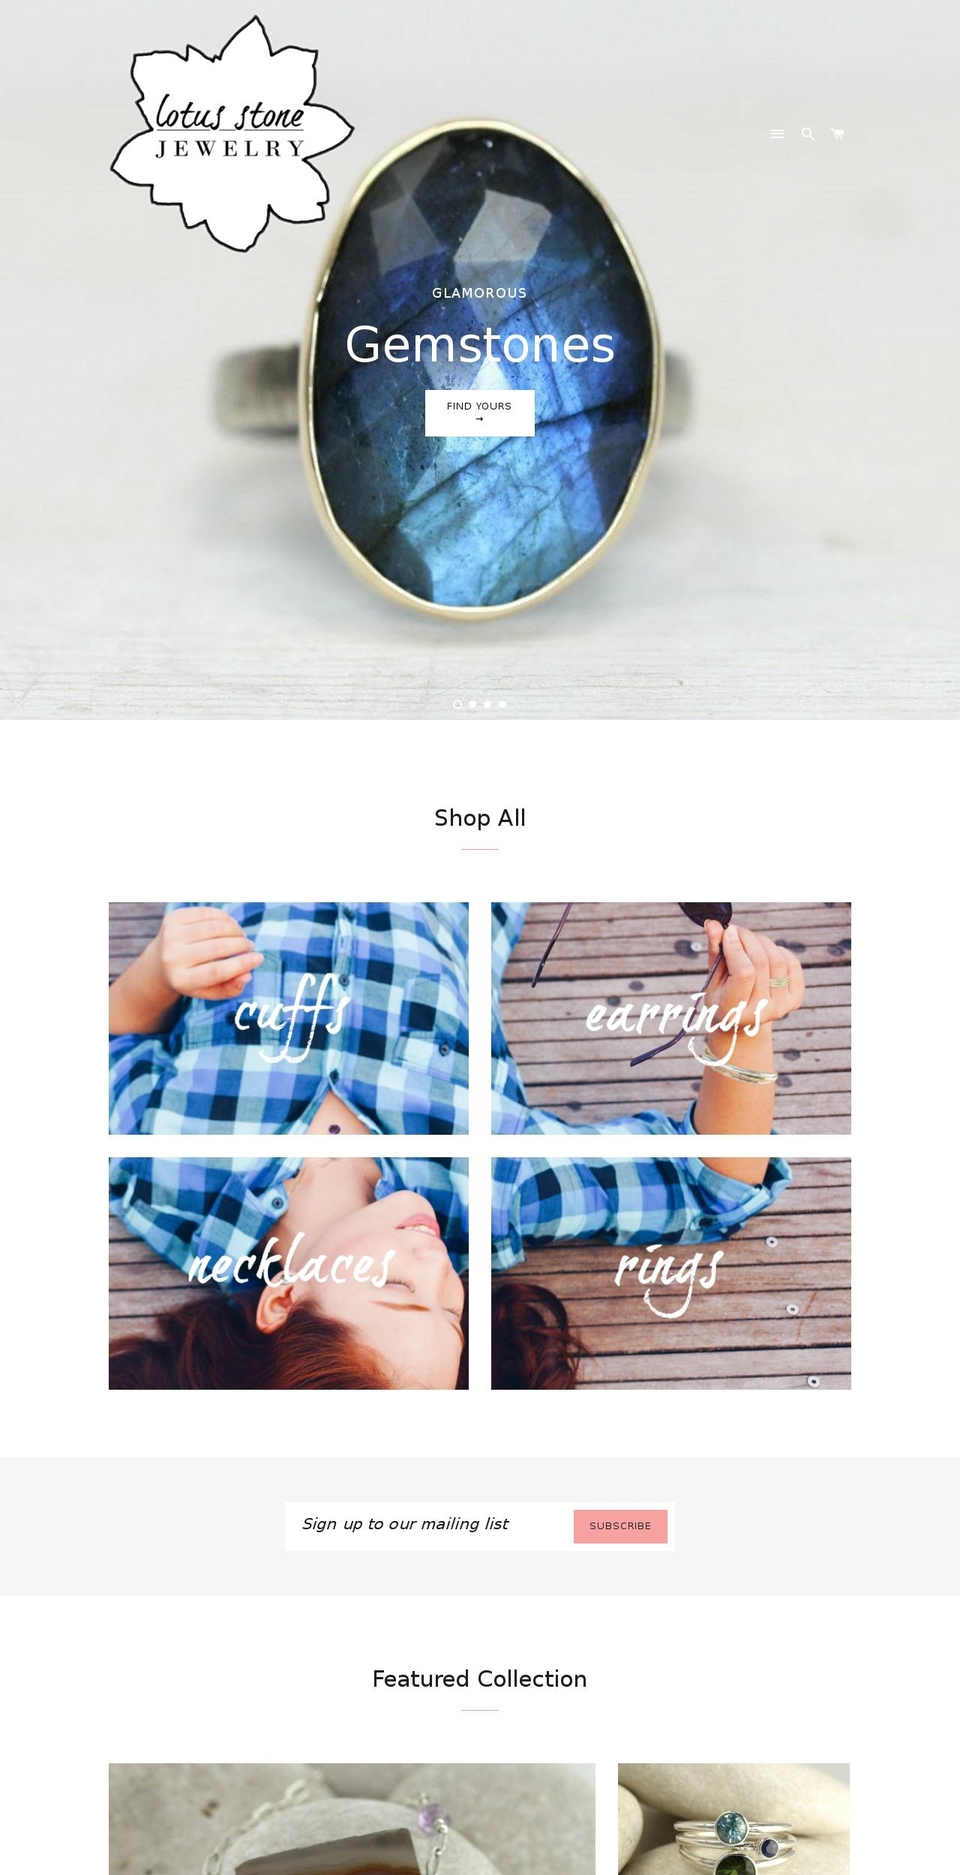 Be Yours Shopify theme site example lotusstonejewelry.com